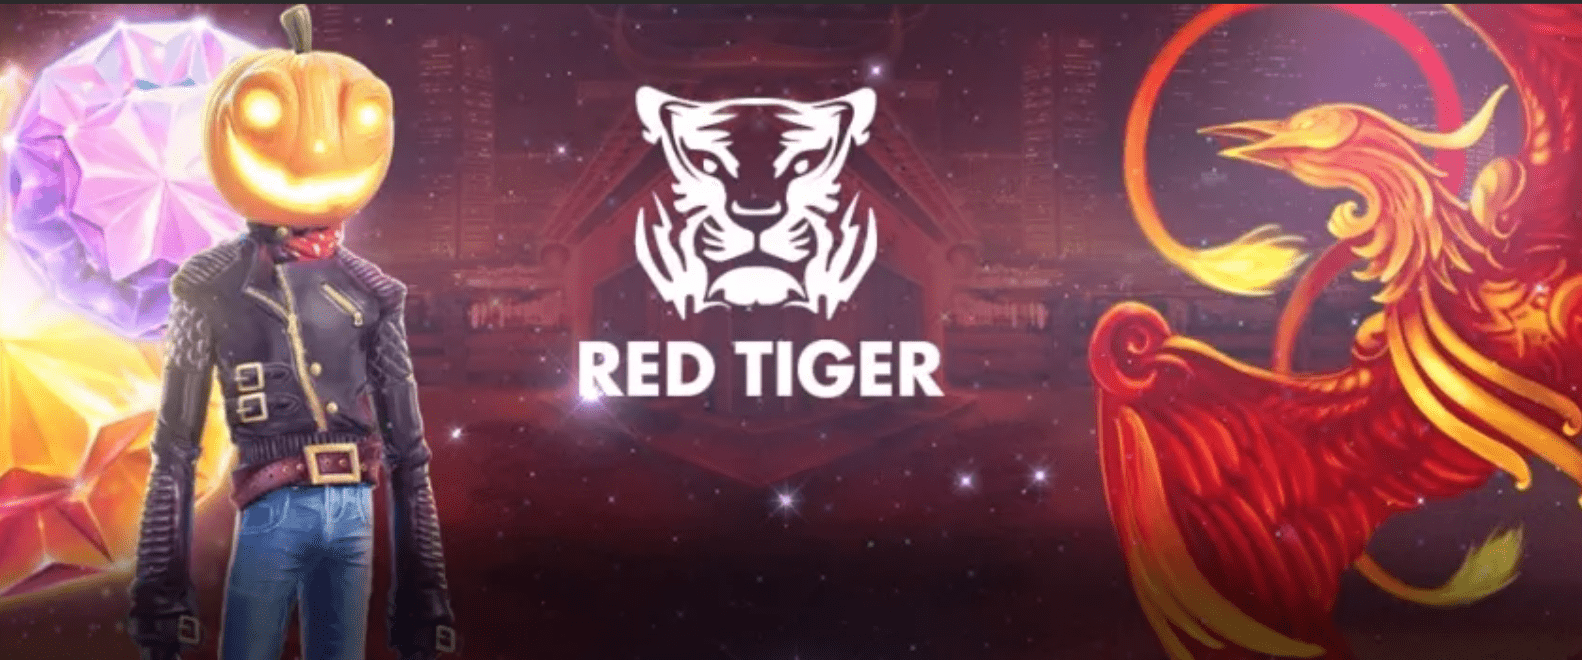 red tiger gaming limited nick maughan